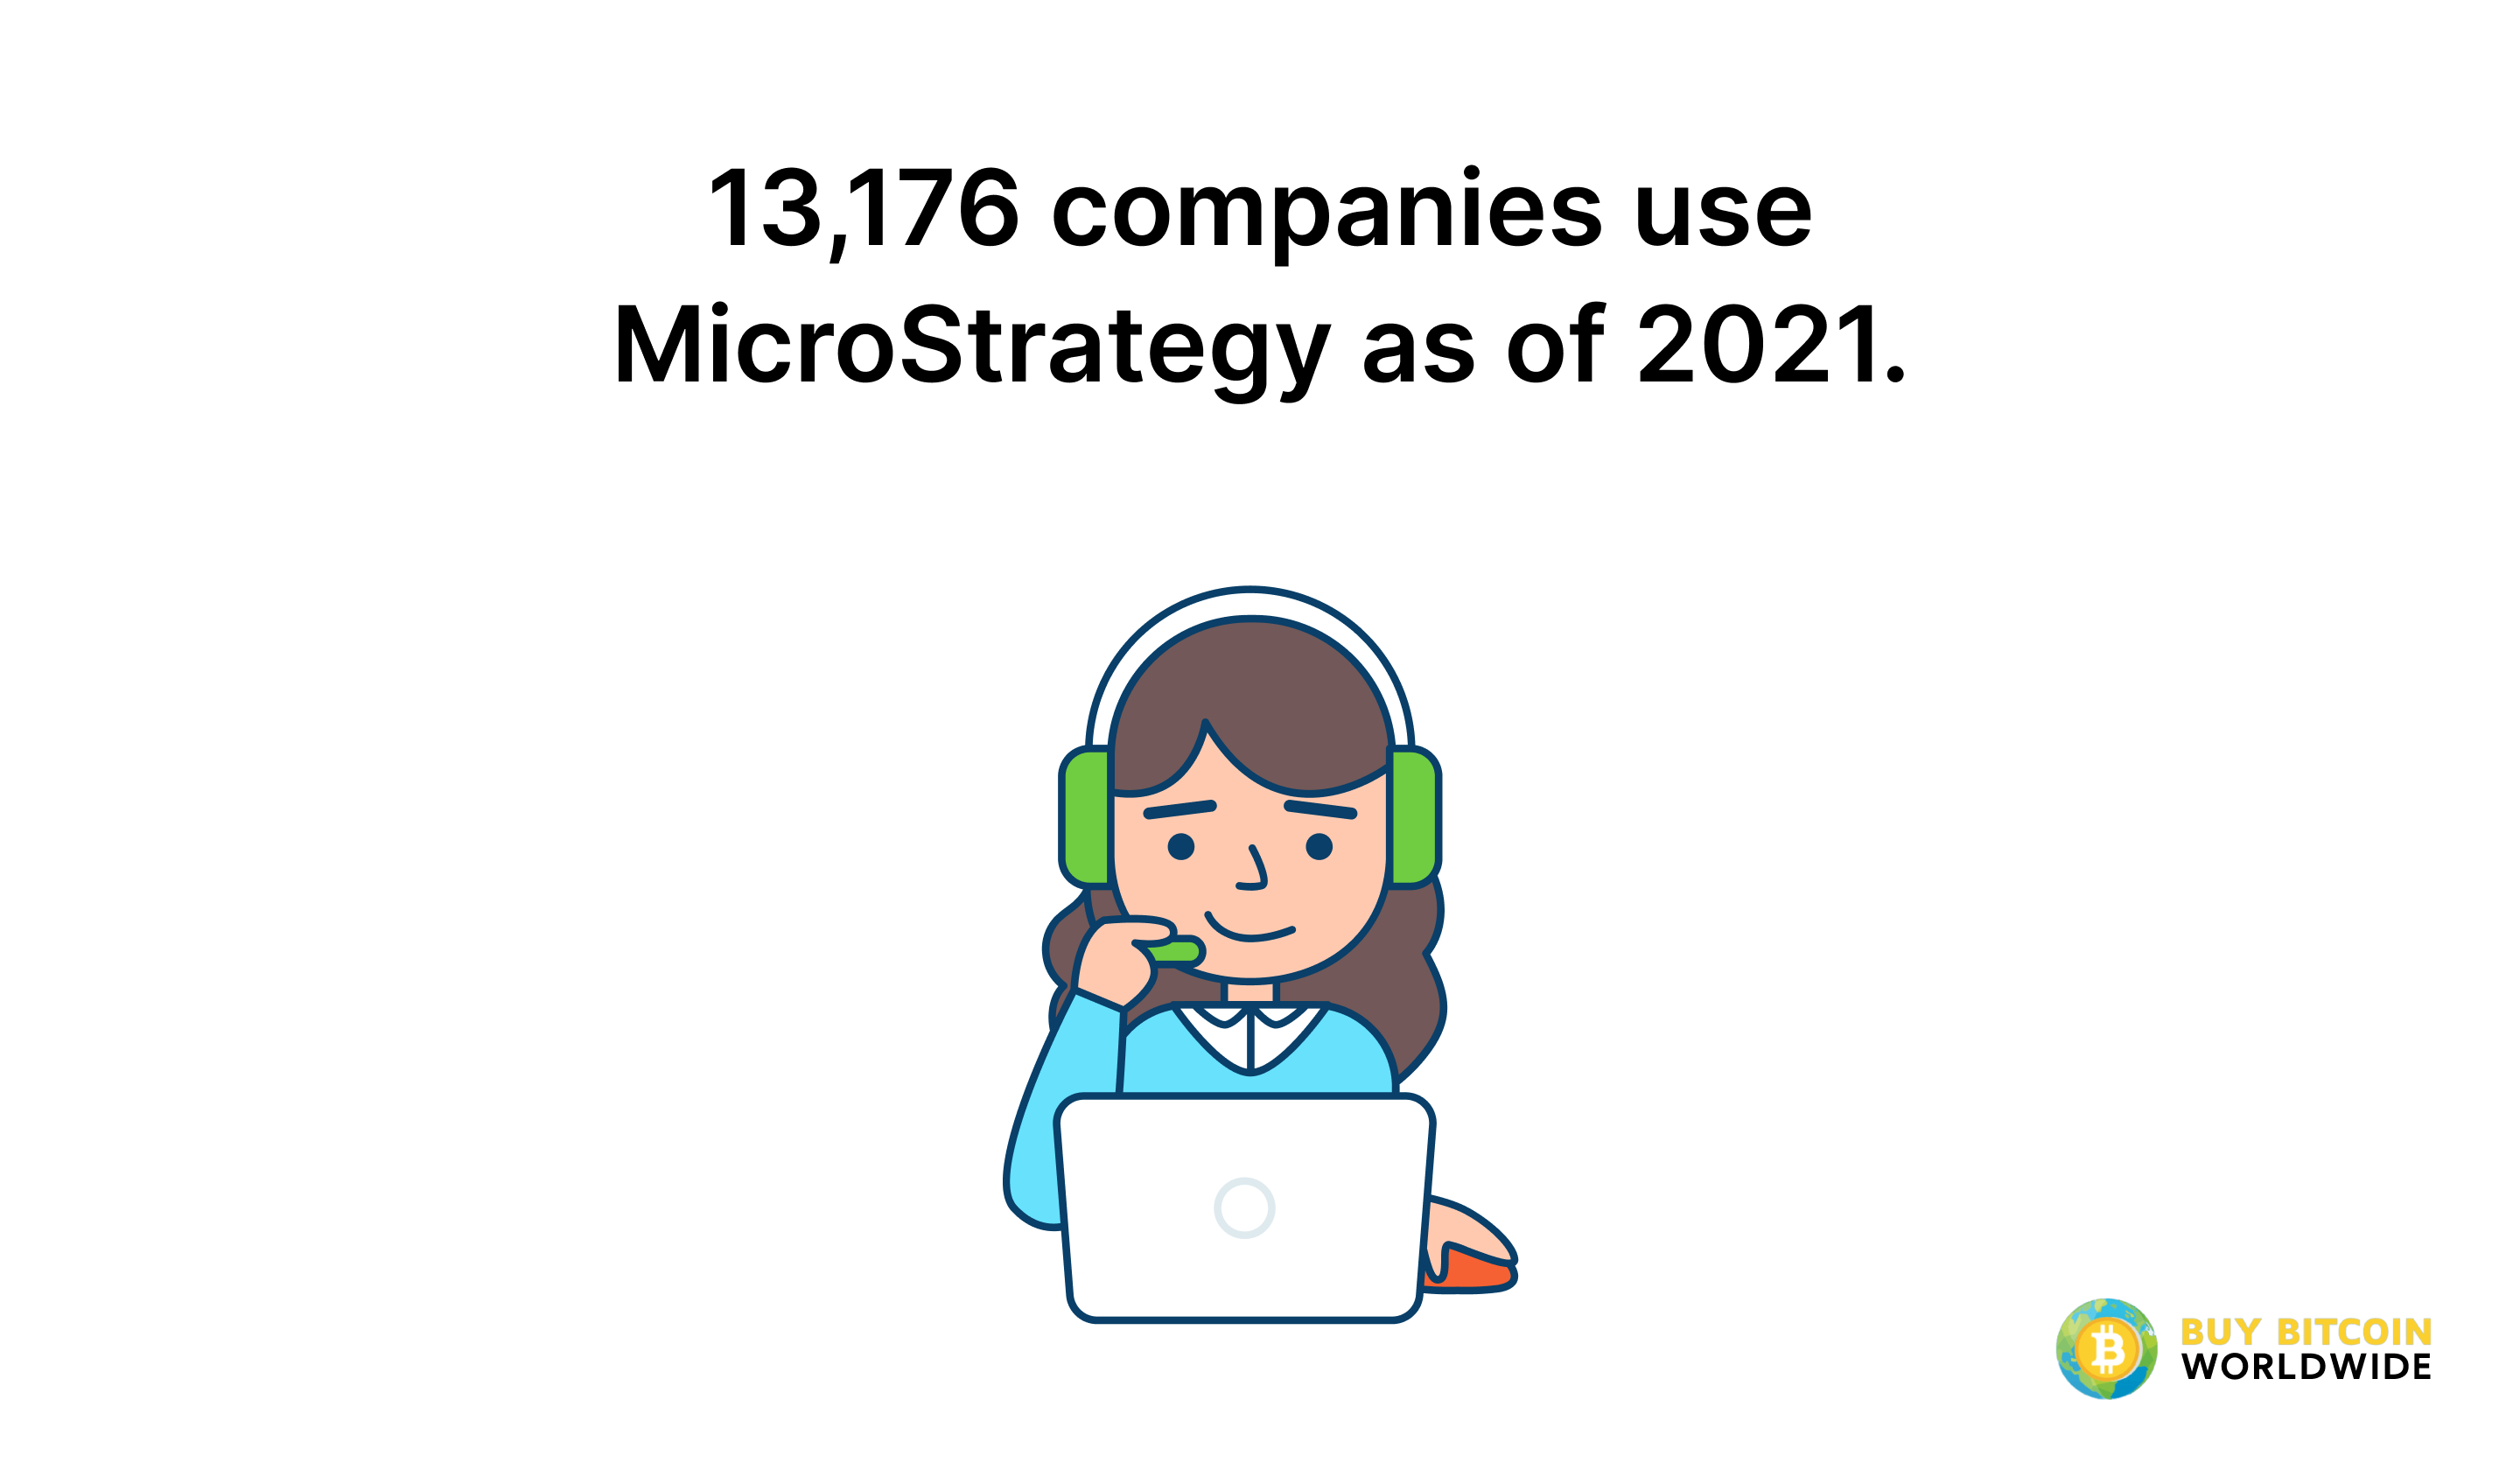 microstrategy customers/users